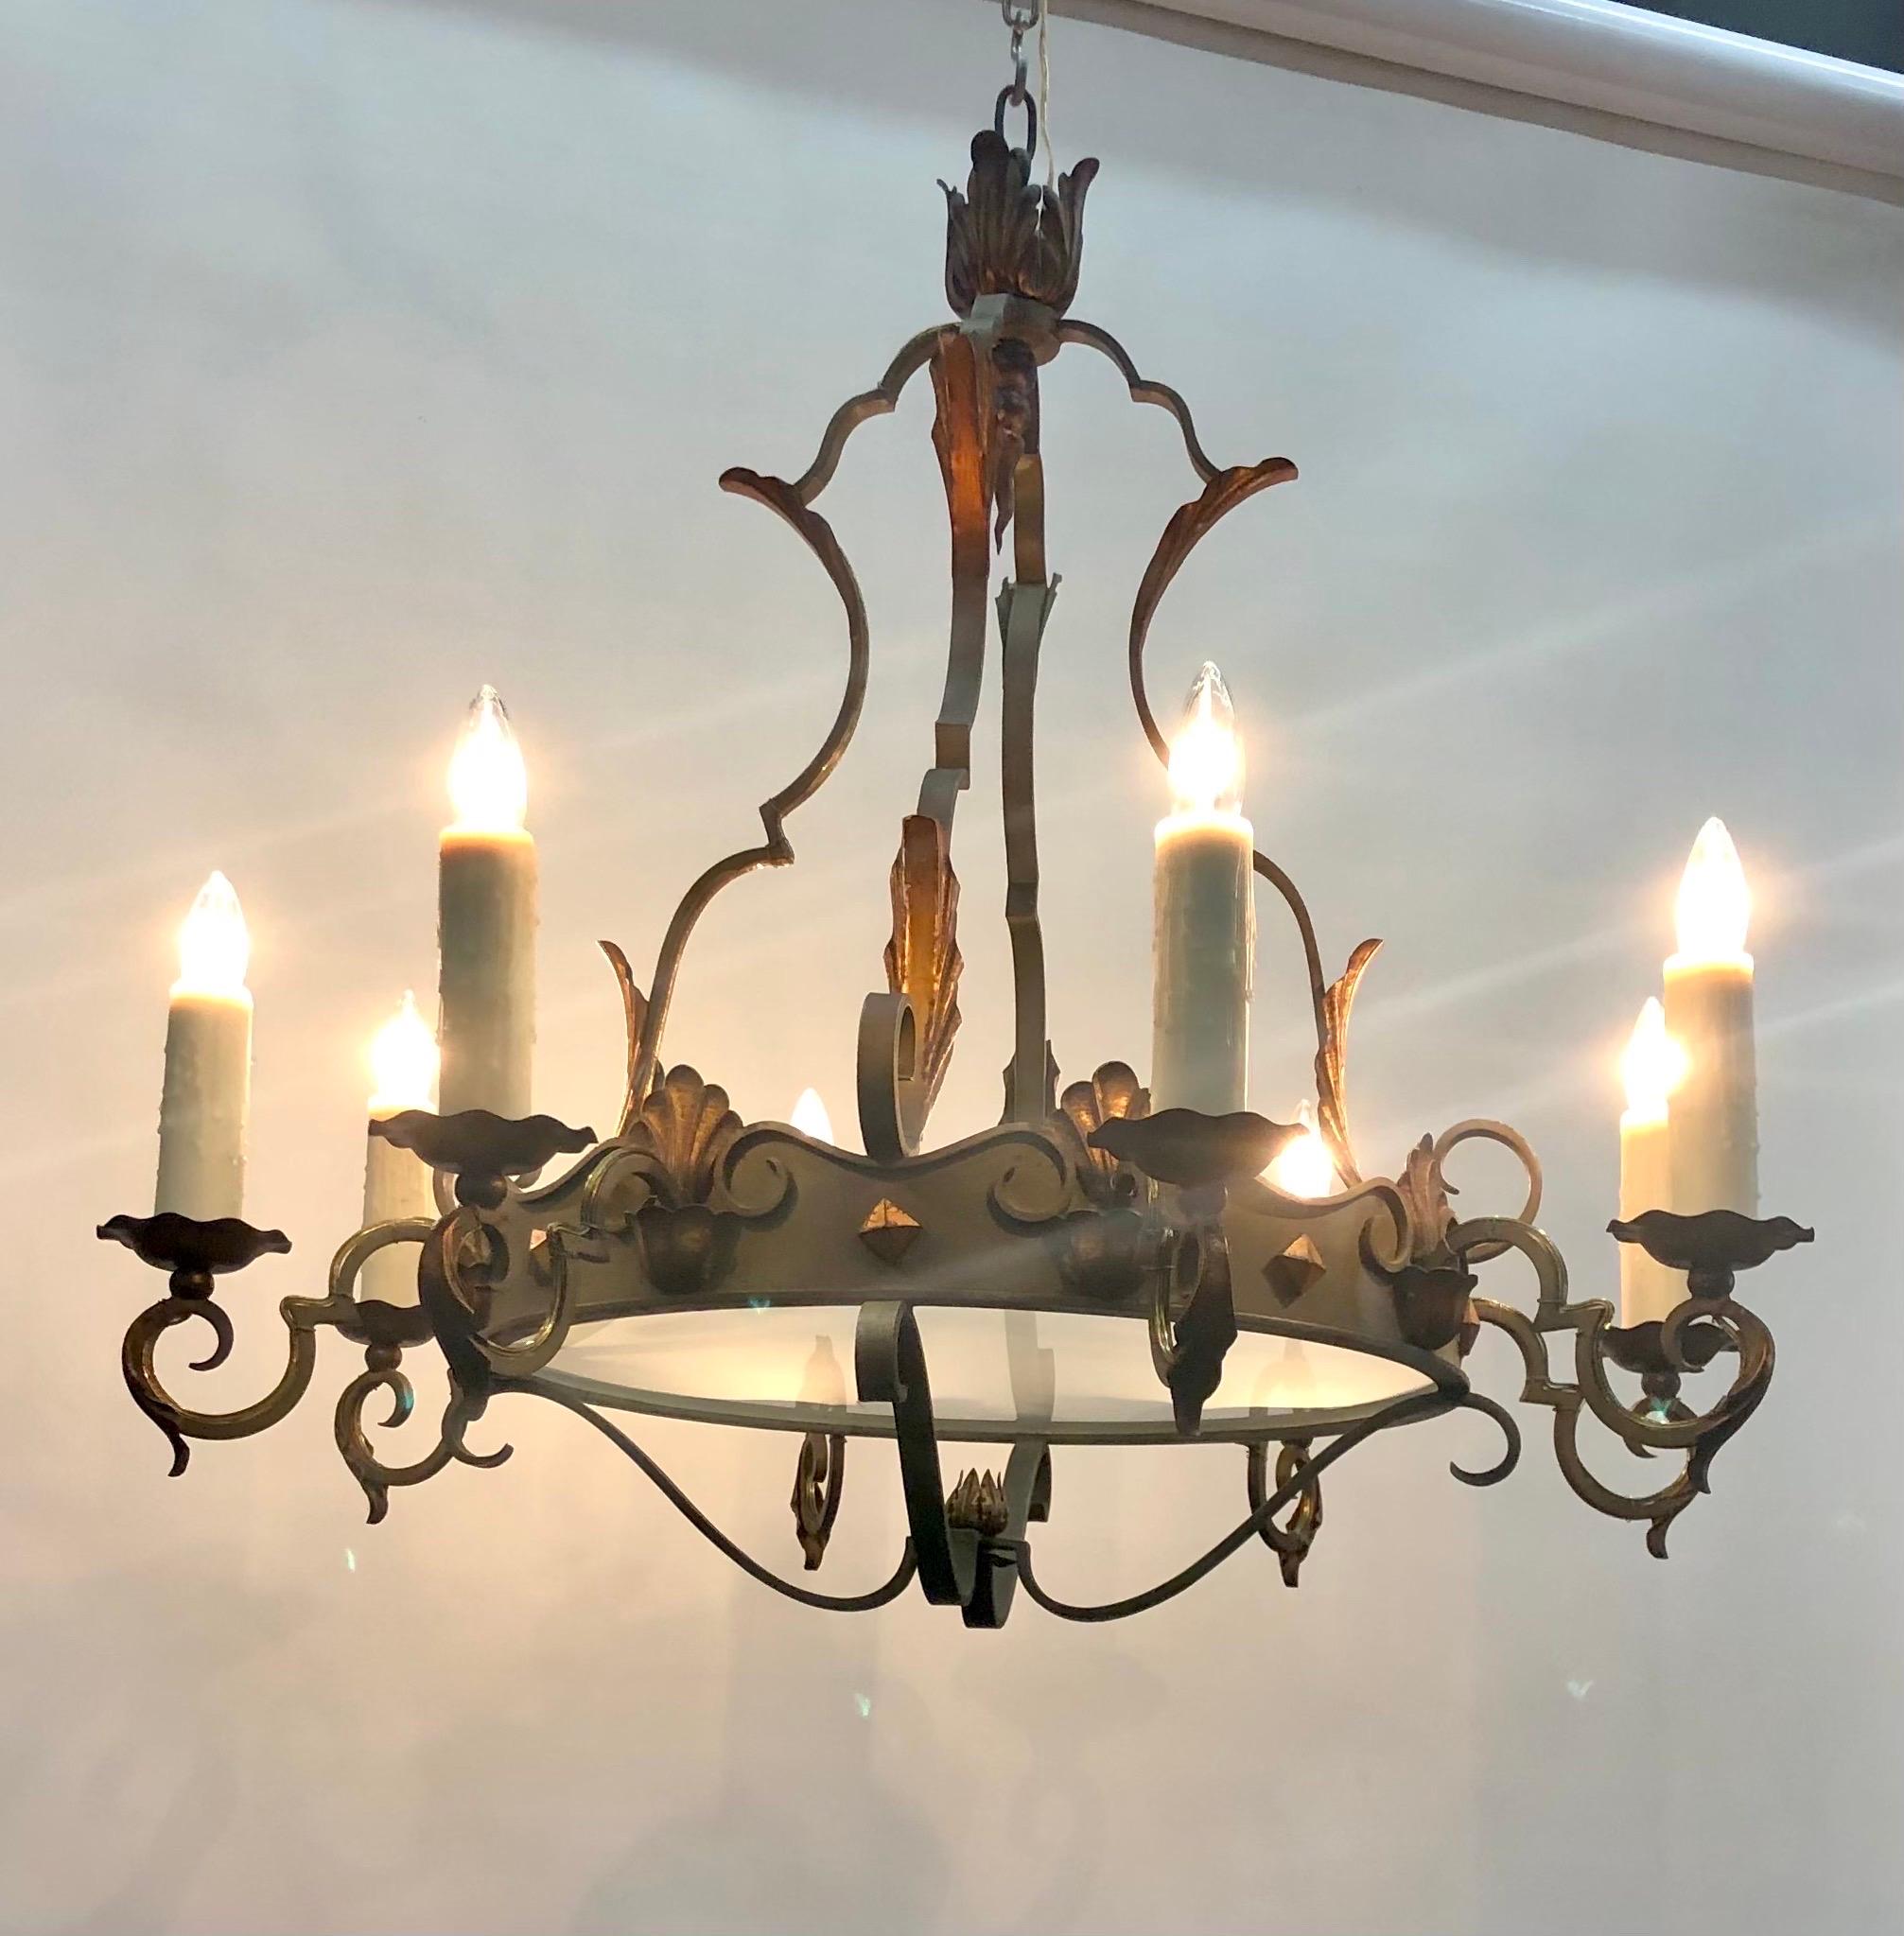 This Grand Elegant  Régence Style French Wrought Iron and Tôle Chandelier was made in the Early 20th Century.  The color of this Verde Wrought Iron with highlighted Lustrous Patinated Gilt Tôle mounts is amazing.  The Central Wrought Iron Tôle Ring